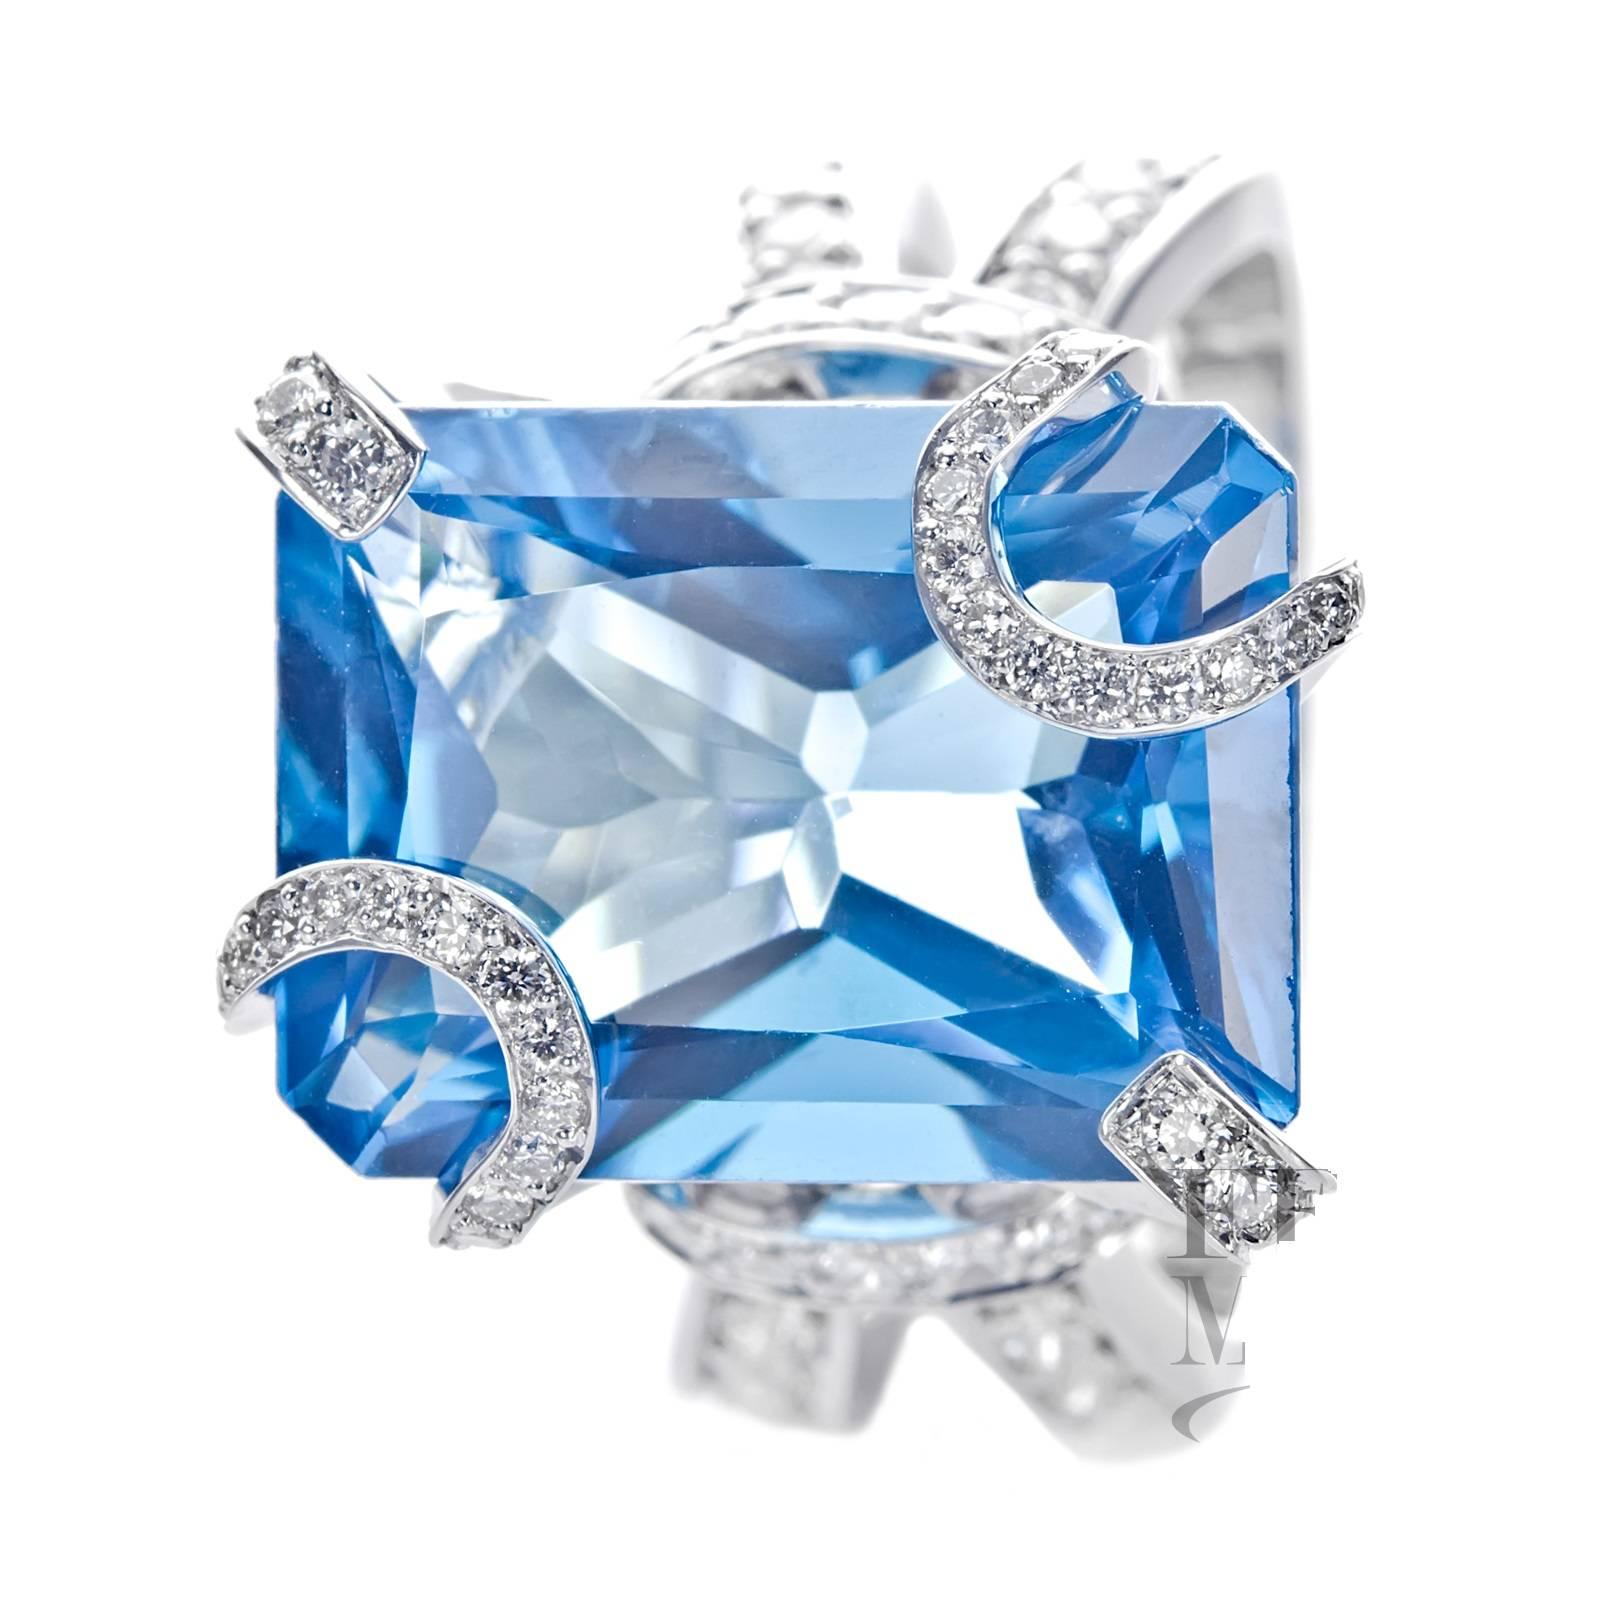 21K Exclusive Collection
Expertly crafted in exclusive 21K white gold
Constructed through micro setting with high quality diamonds
Micro setting done by master setters
Complimented by large center topaz gemstone
Band sold separately
Includes a